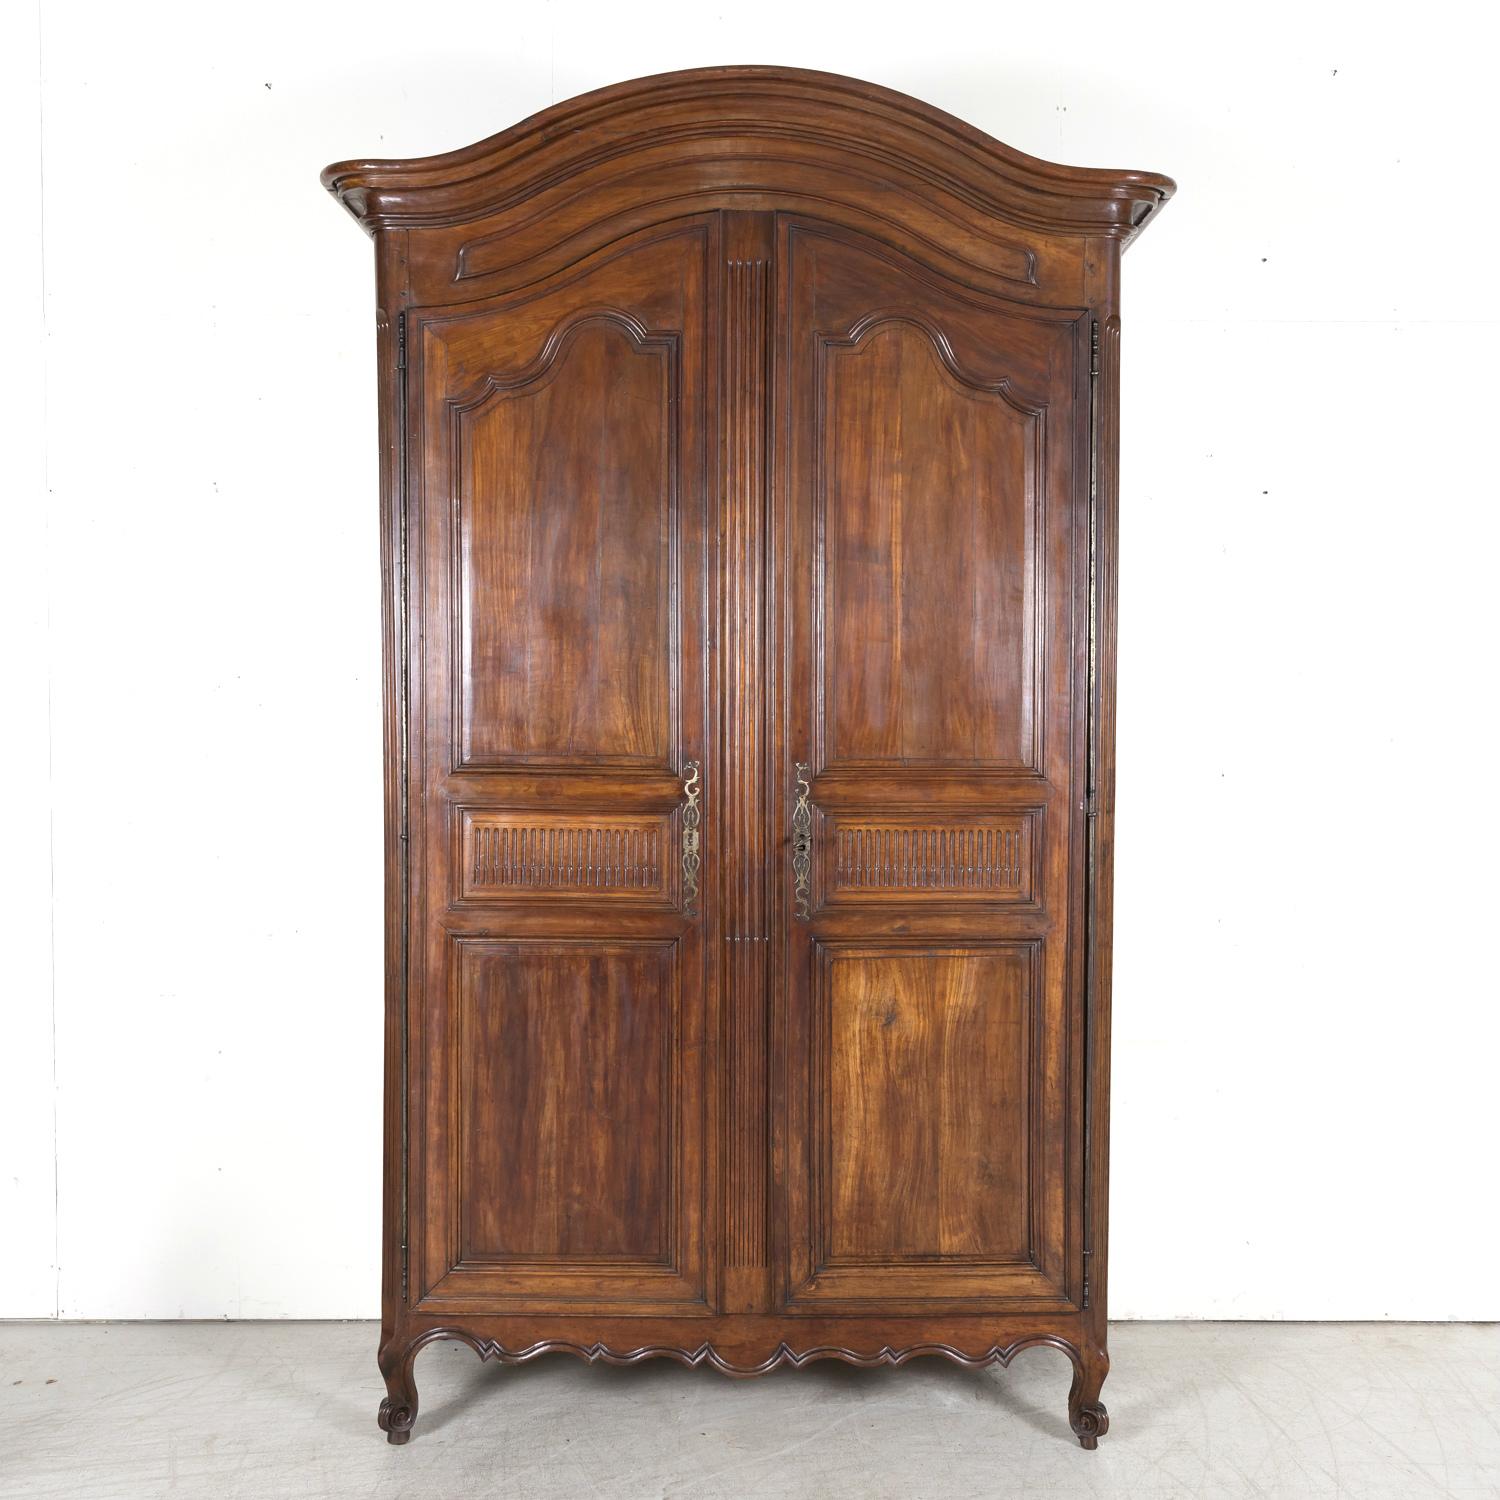 A monumental 18th century French Louis XV-Louis XVI Transition period solid walnut chateau armoire handcrafted by skilled artisans from the Bordeaux region of France, circa 1750s, having a chapeau de gendarme crown sitting atop a hand carved frieze.